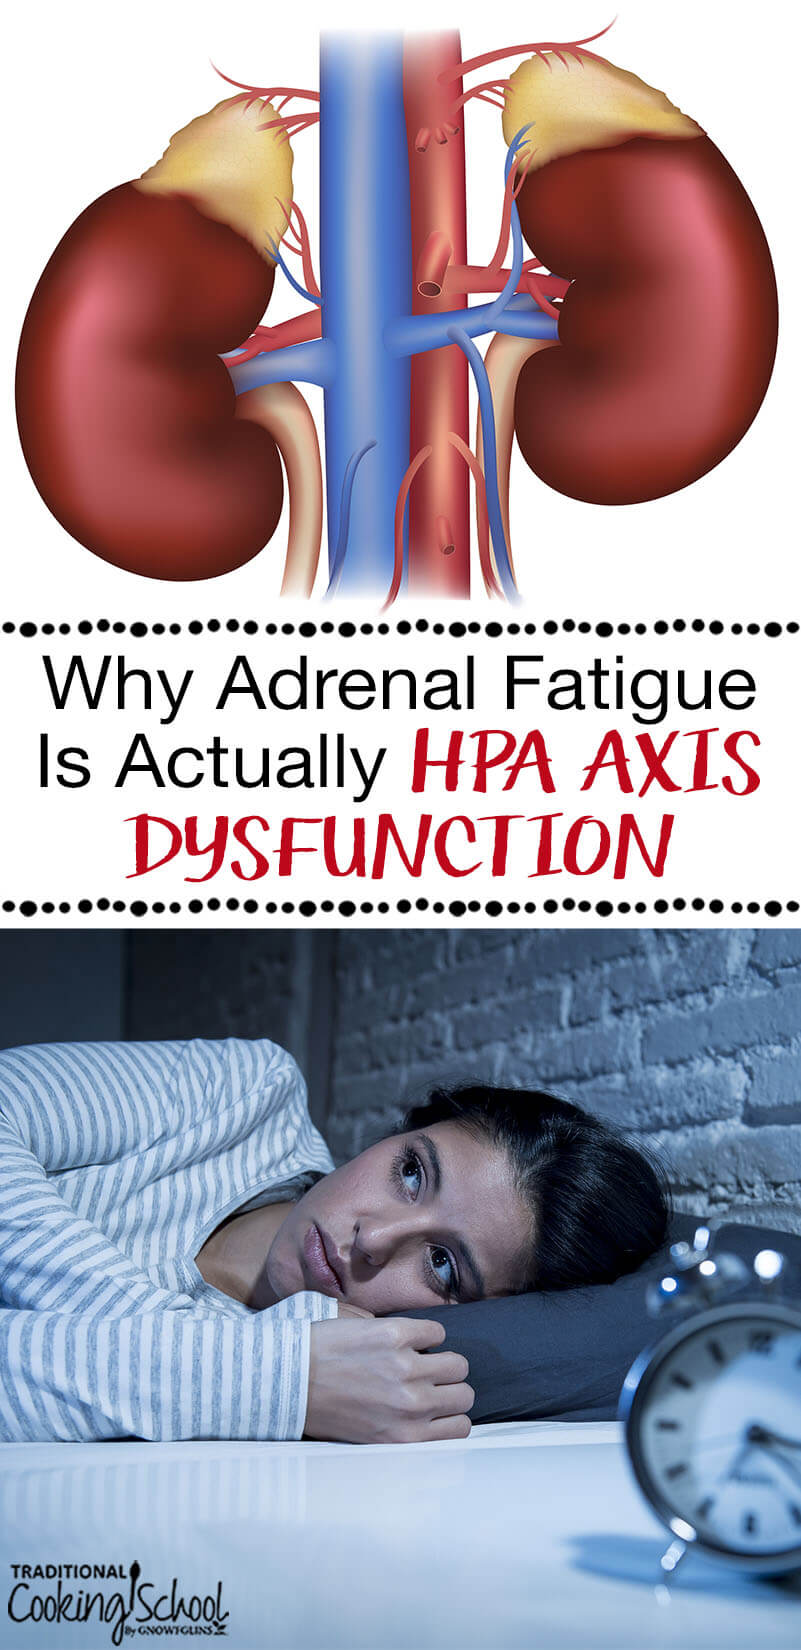 The hypothalamus-pituitary-adrenal loop produces hormones that regulate our blood pressure, libido, metabolism, and stress response. When interference happens, symptoms of a hormone imbalance occur: insomnia, fatigue, anxiety/depression, thyroid issues, and more. This used to be called 'adrenal fatigue', but was that accurate? Learn why adrenal fatigue is actually HPA axis dysfunction.